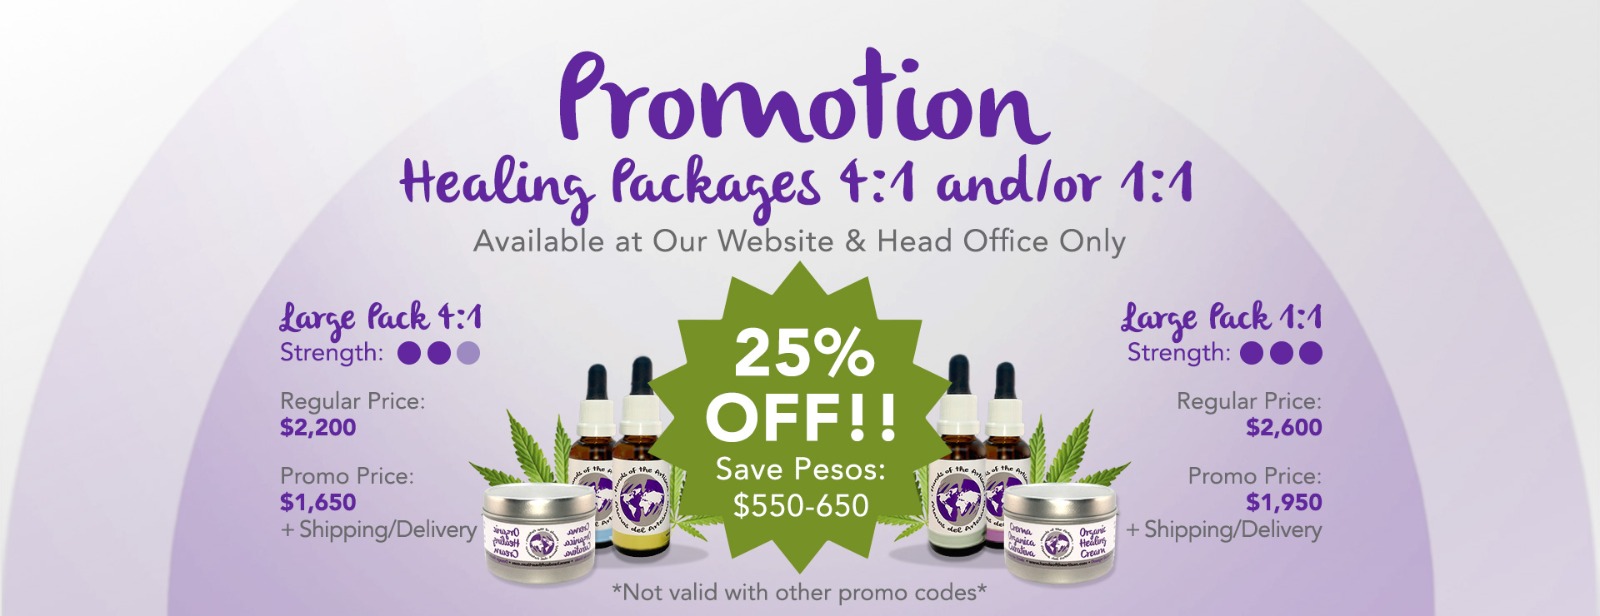 Large Healing Packages Promo